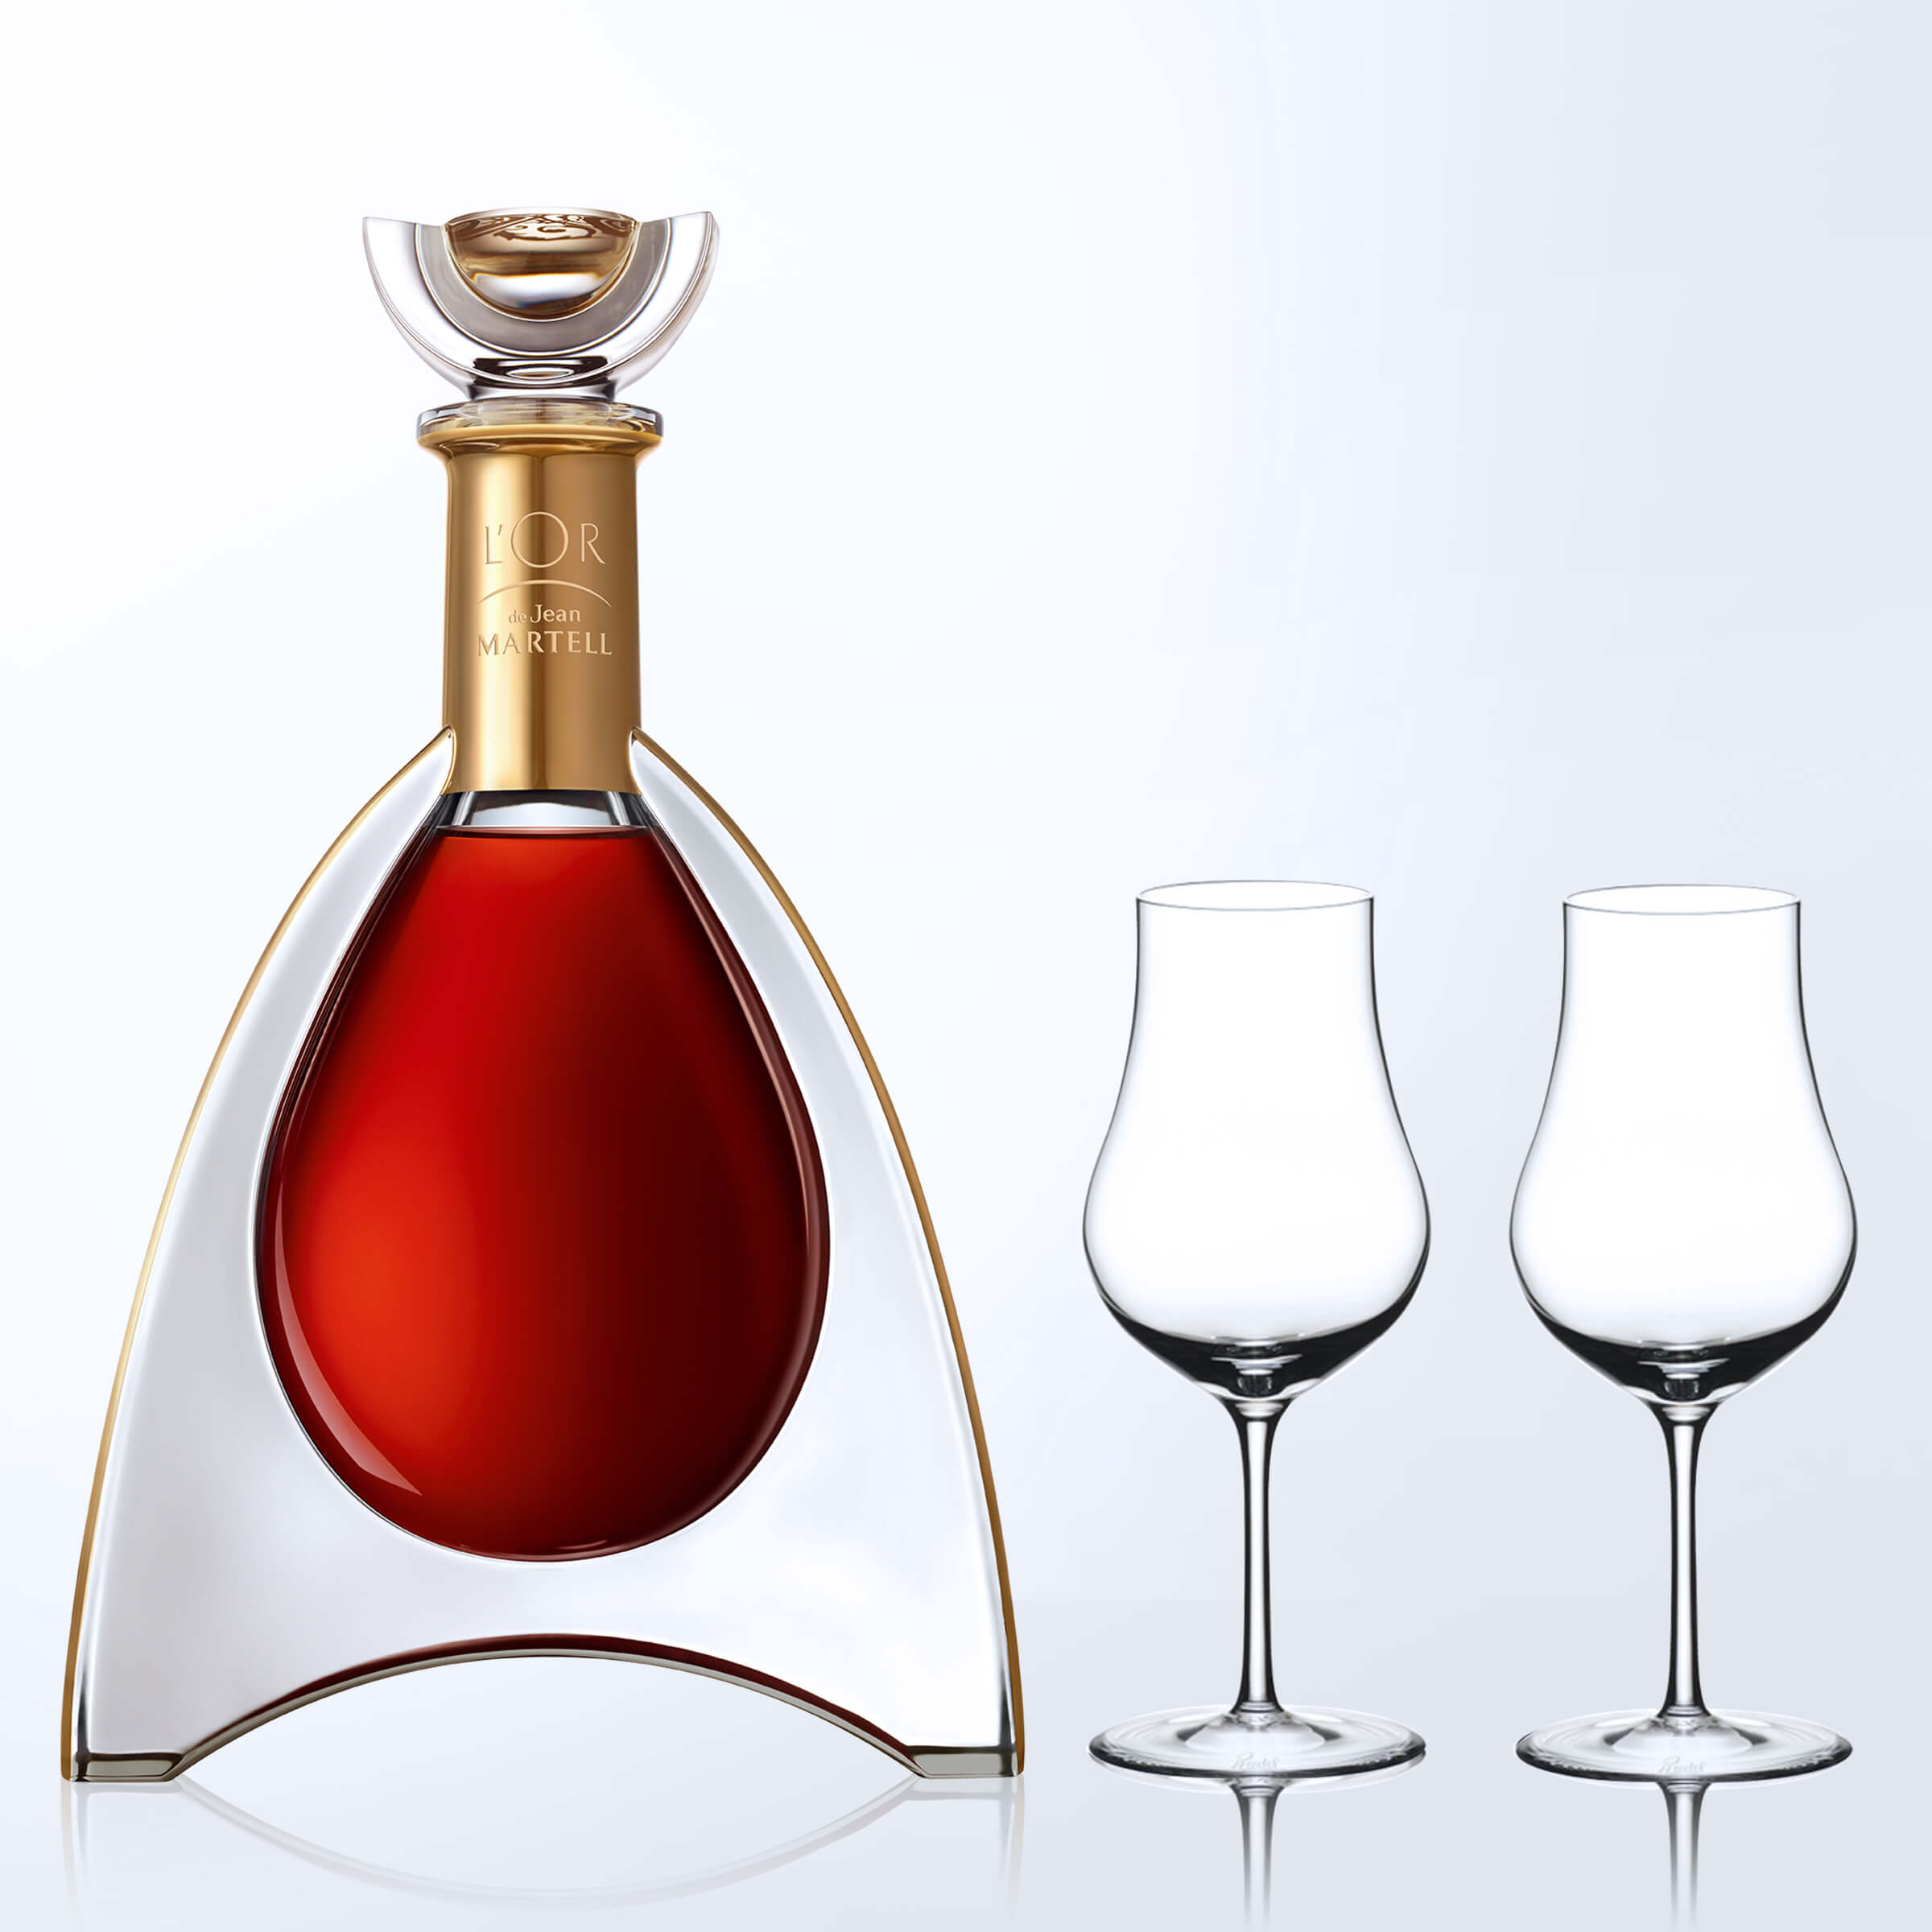 L'Or de Jean Martell & Crystal Glasses Gift Set with Engraving |尚馬爹利至尊&水晶洋酒杯套裝(含文字雕刻） - Design Your Own Wine